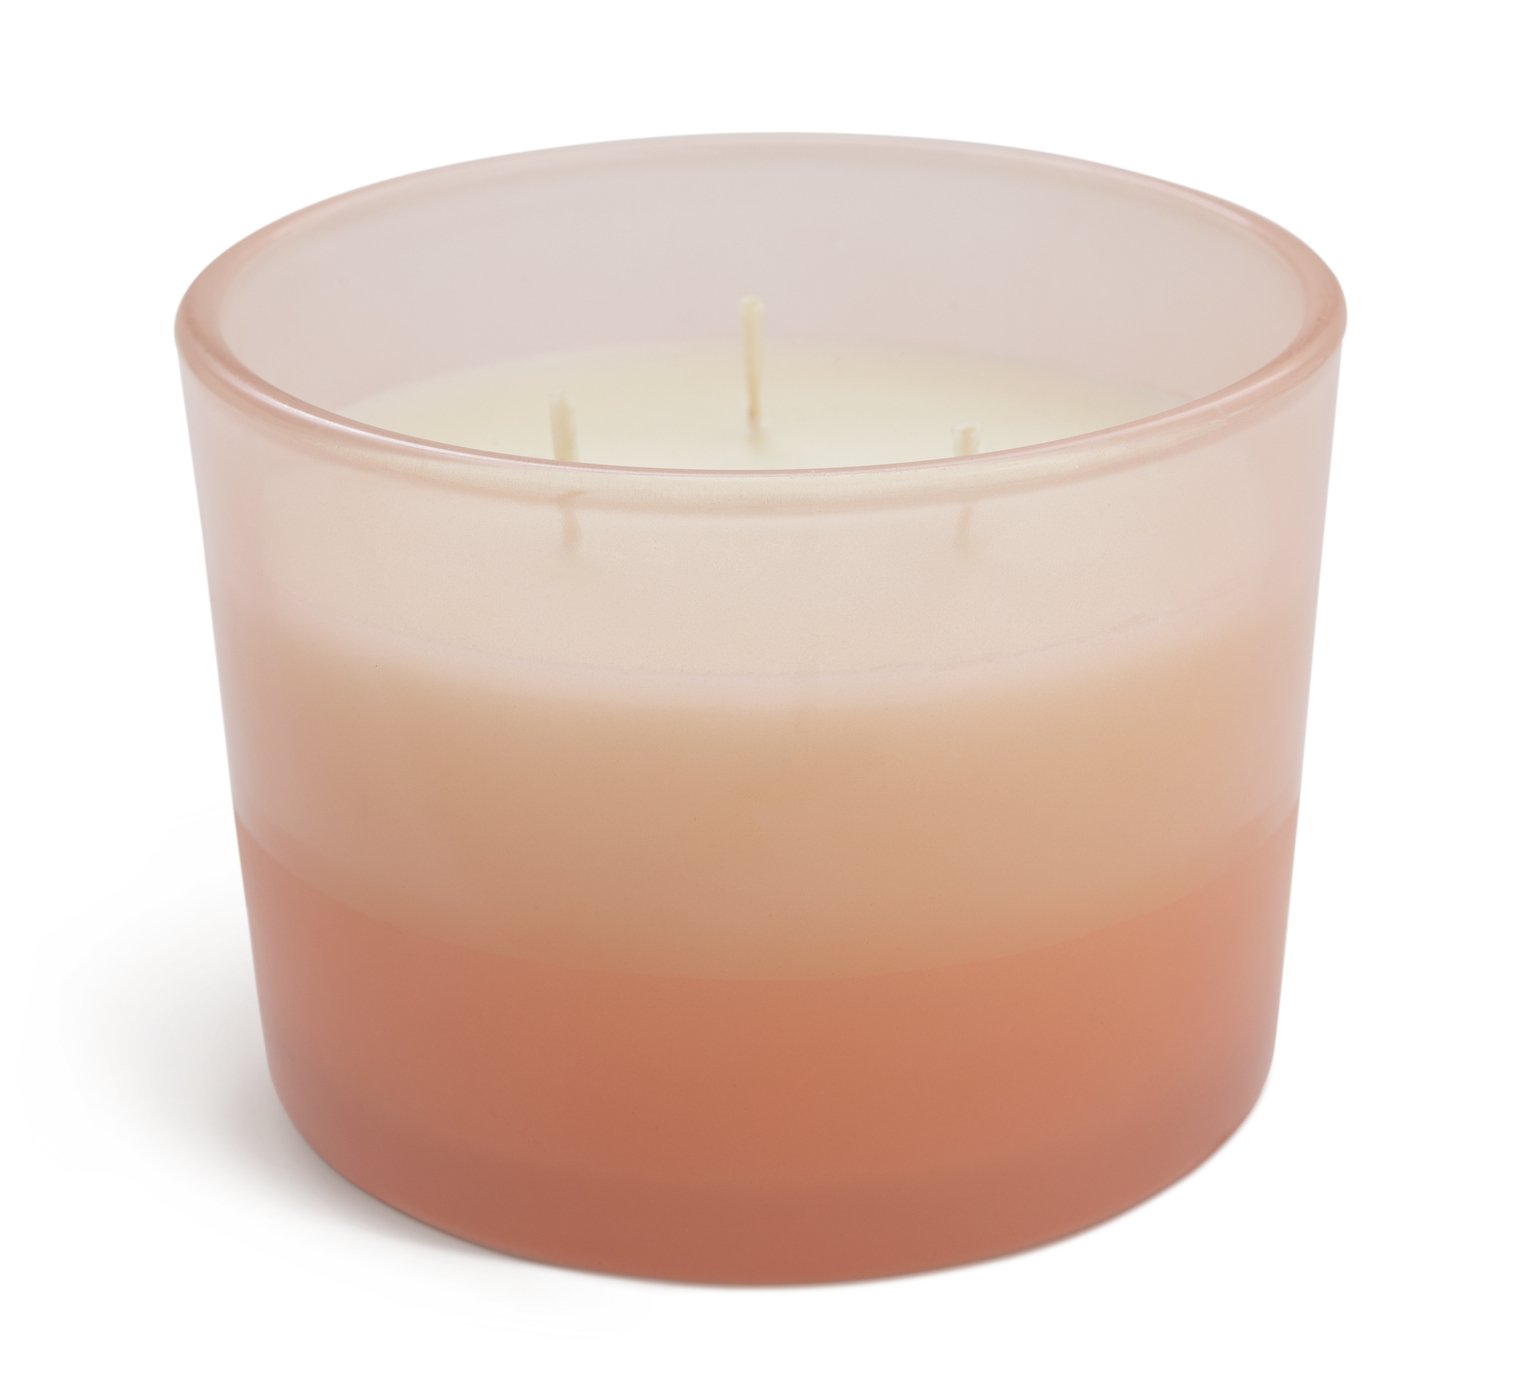 Habitat Multi Wick Scented Candle - Peony & White Lily